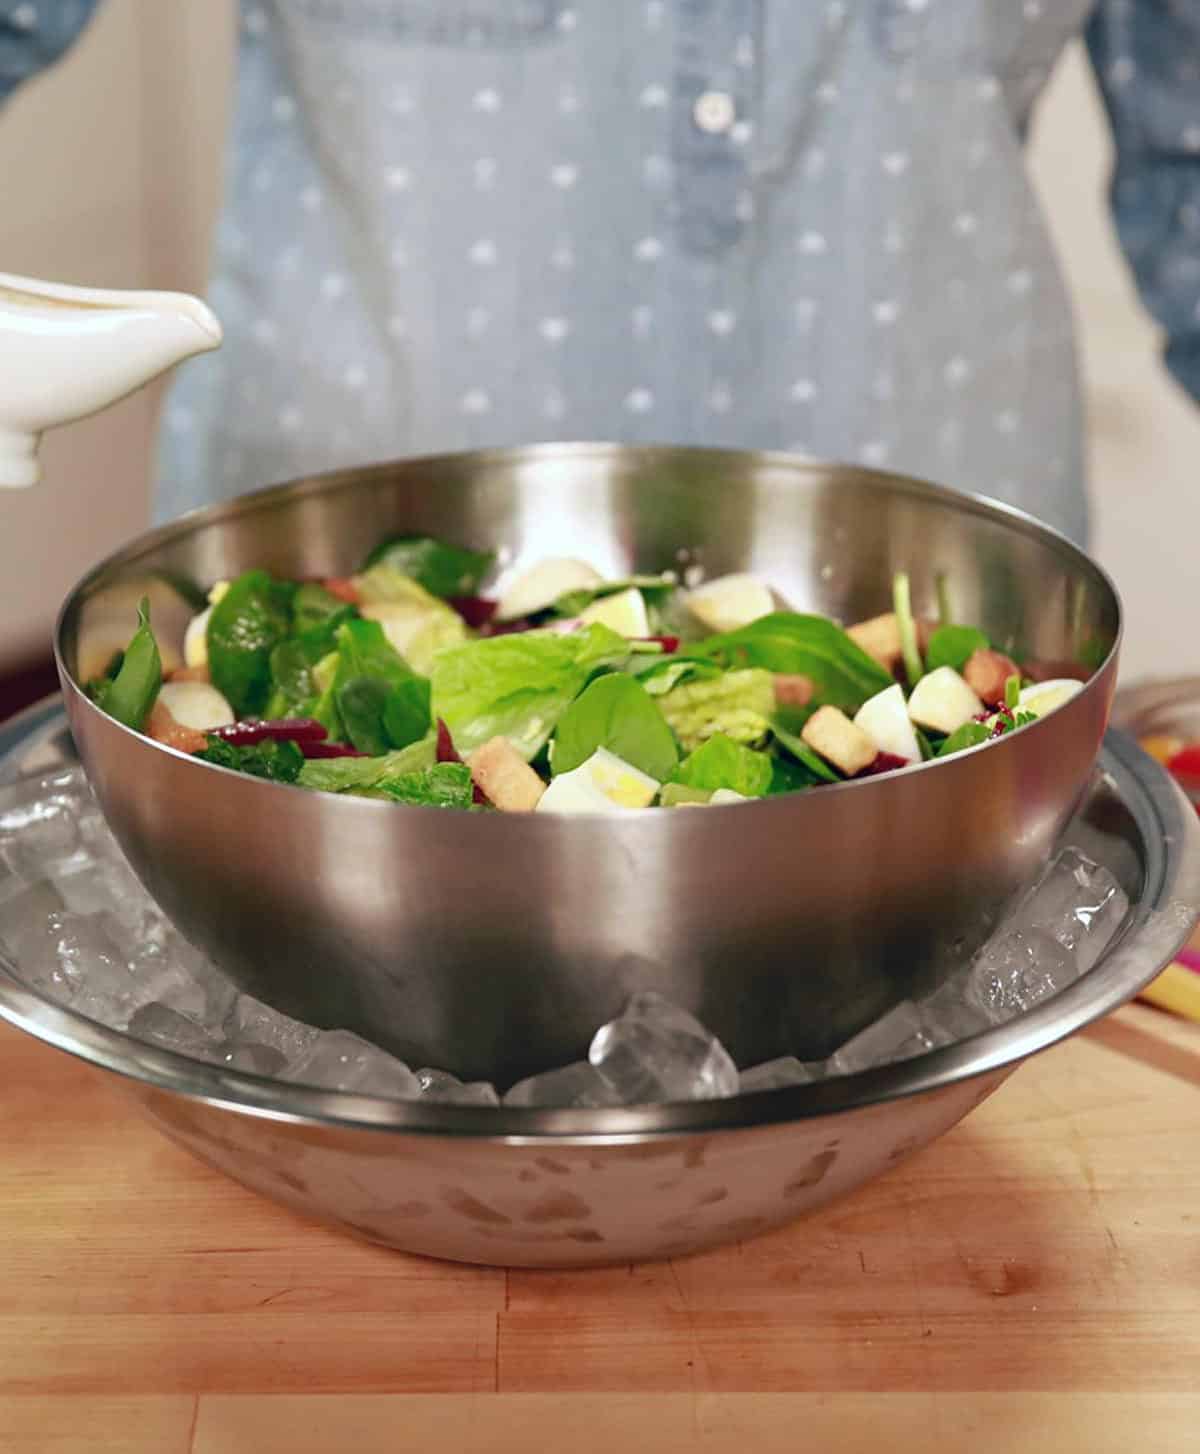  Fresh ingredients make all the difference in this flavorful salad